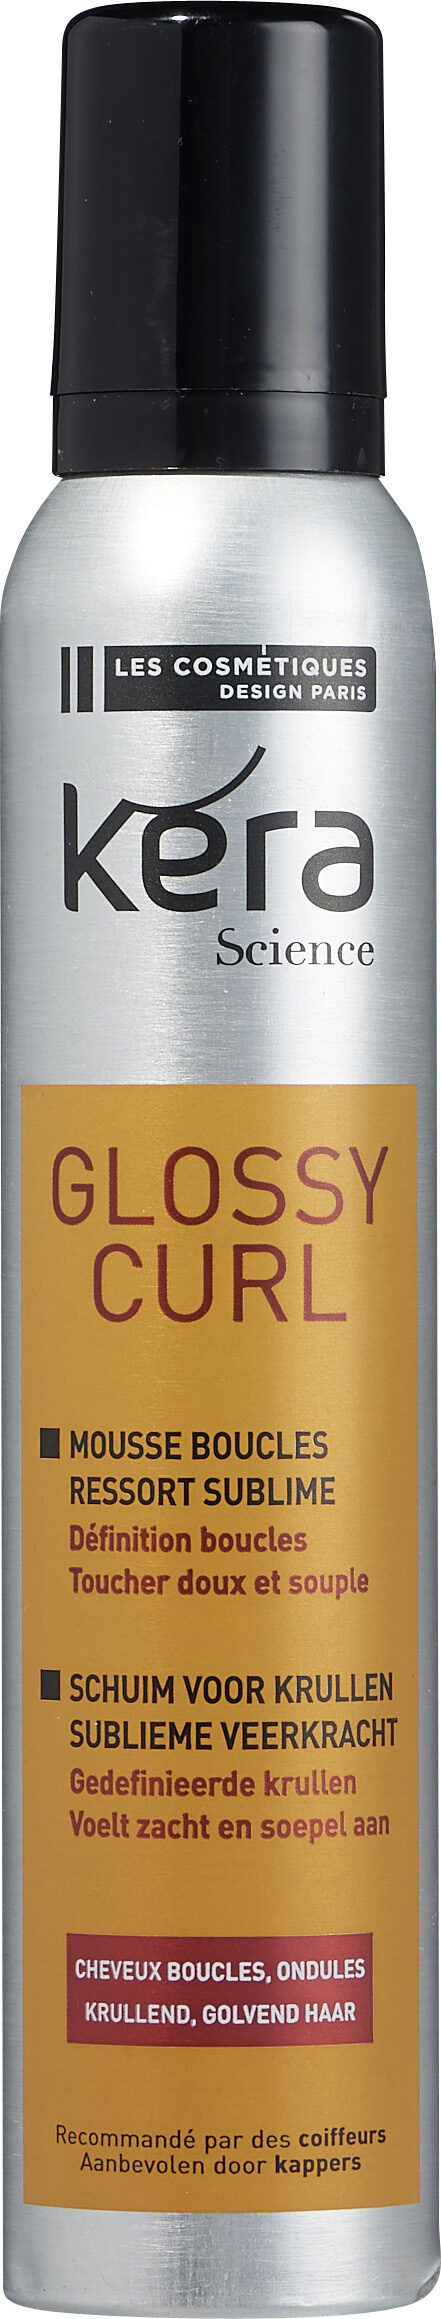 Glossy Curl - Mousse boucles - Product - fr